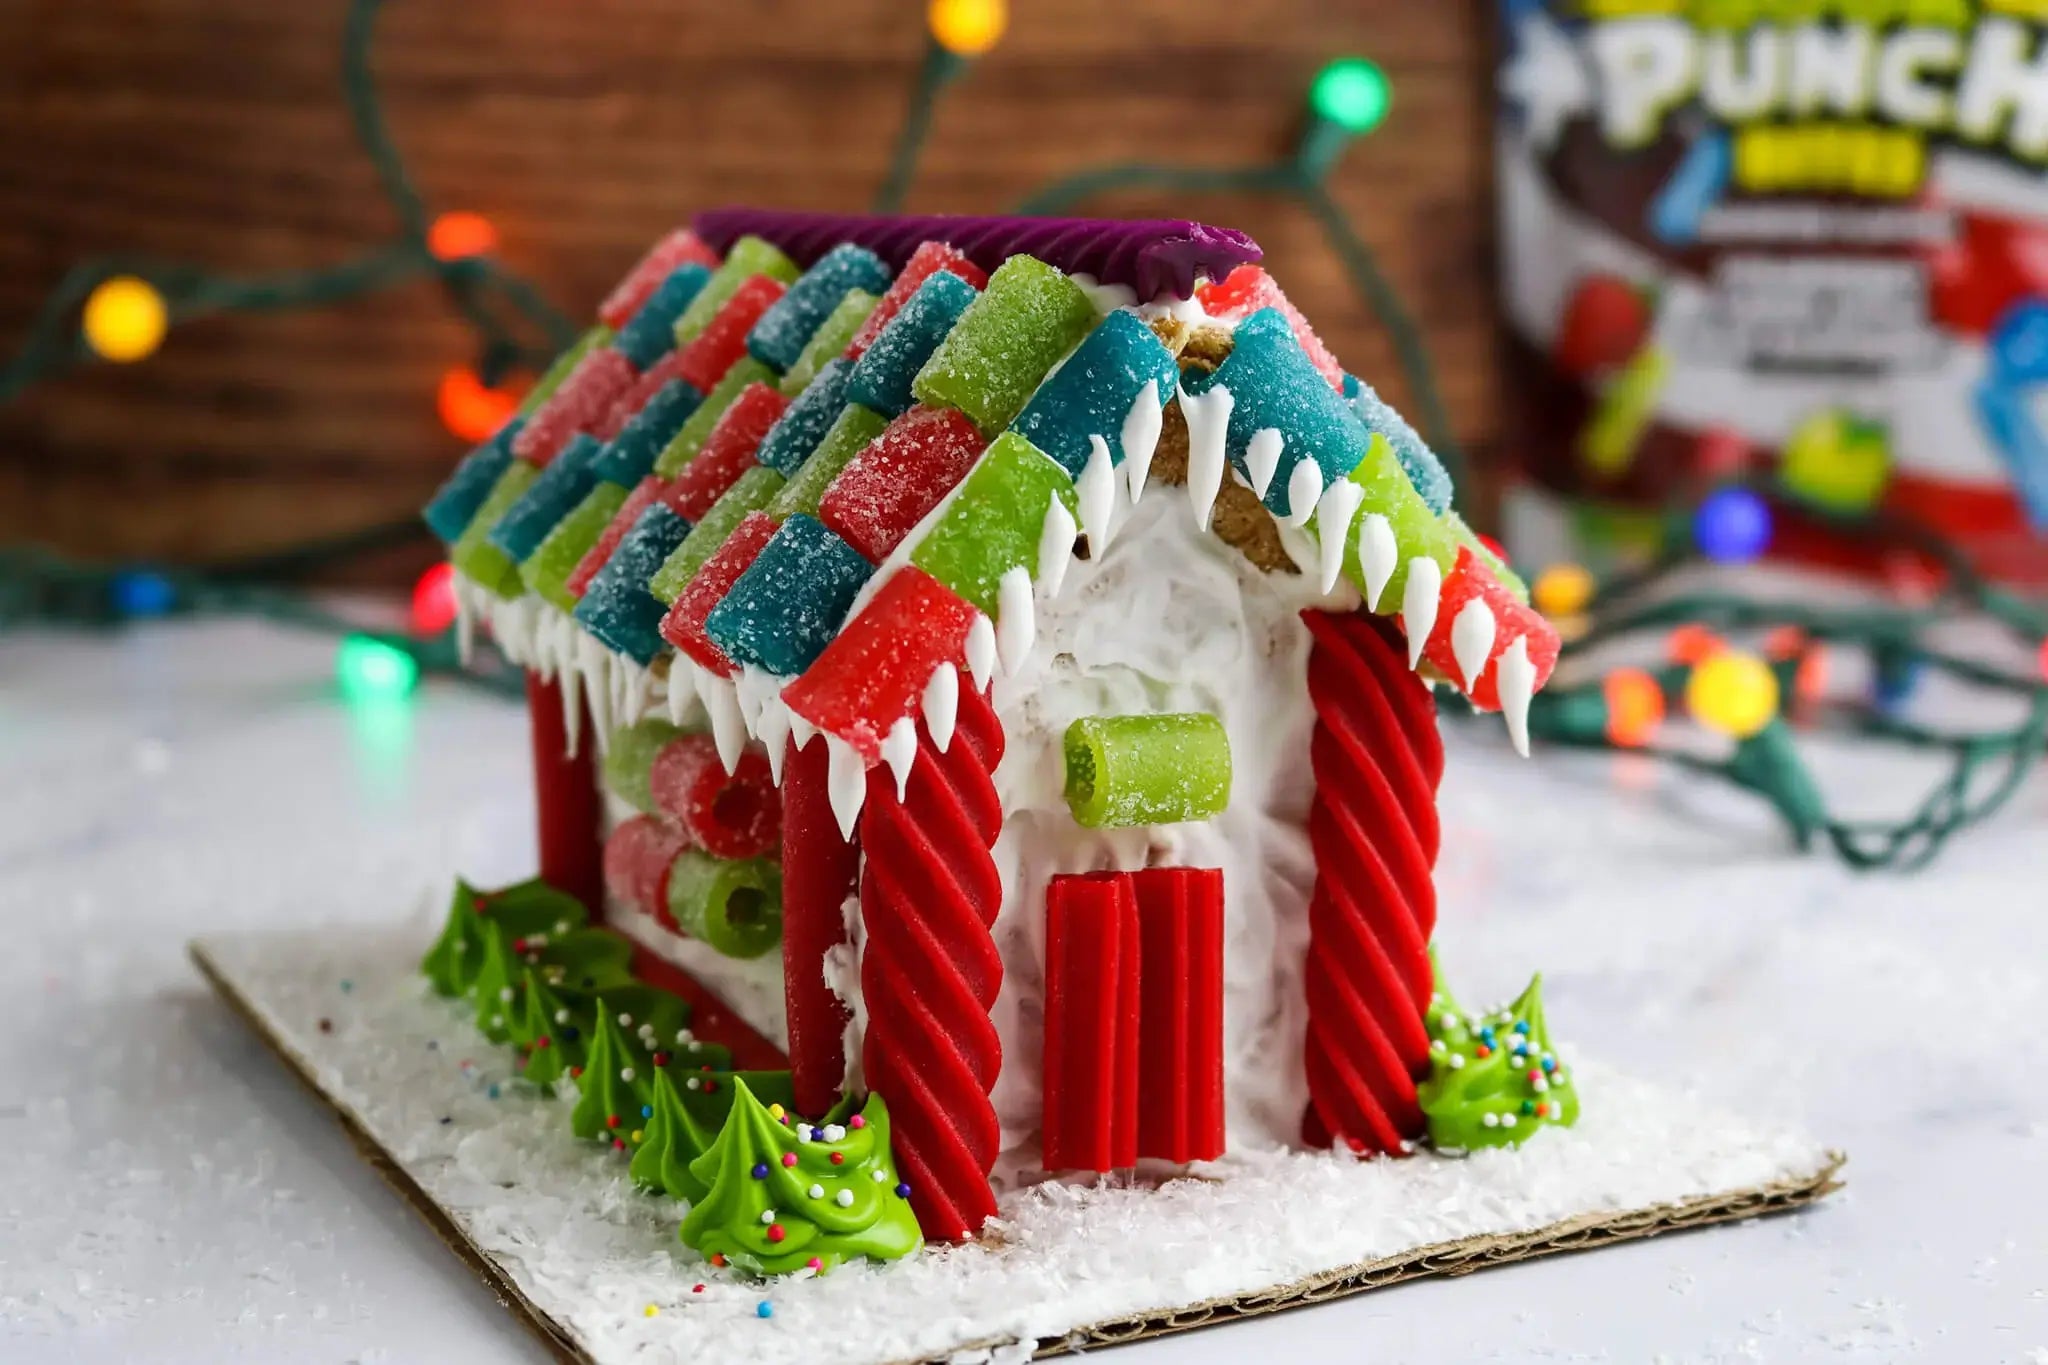 Graham cracker gingerbread house featuring Sour Punch candy and Red Vines candy